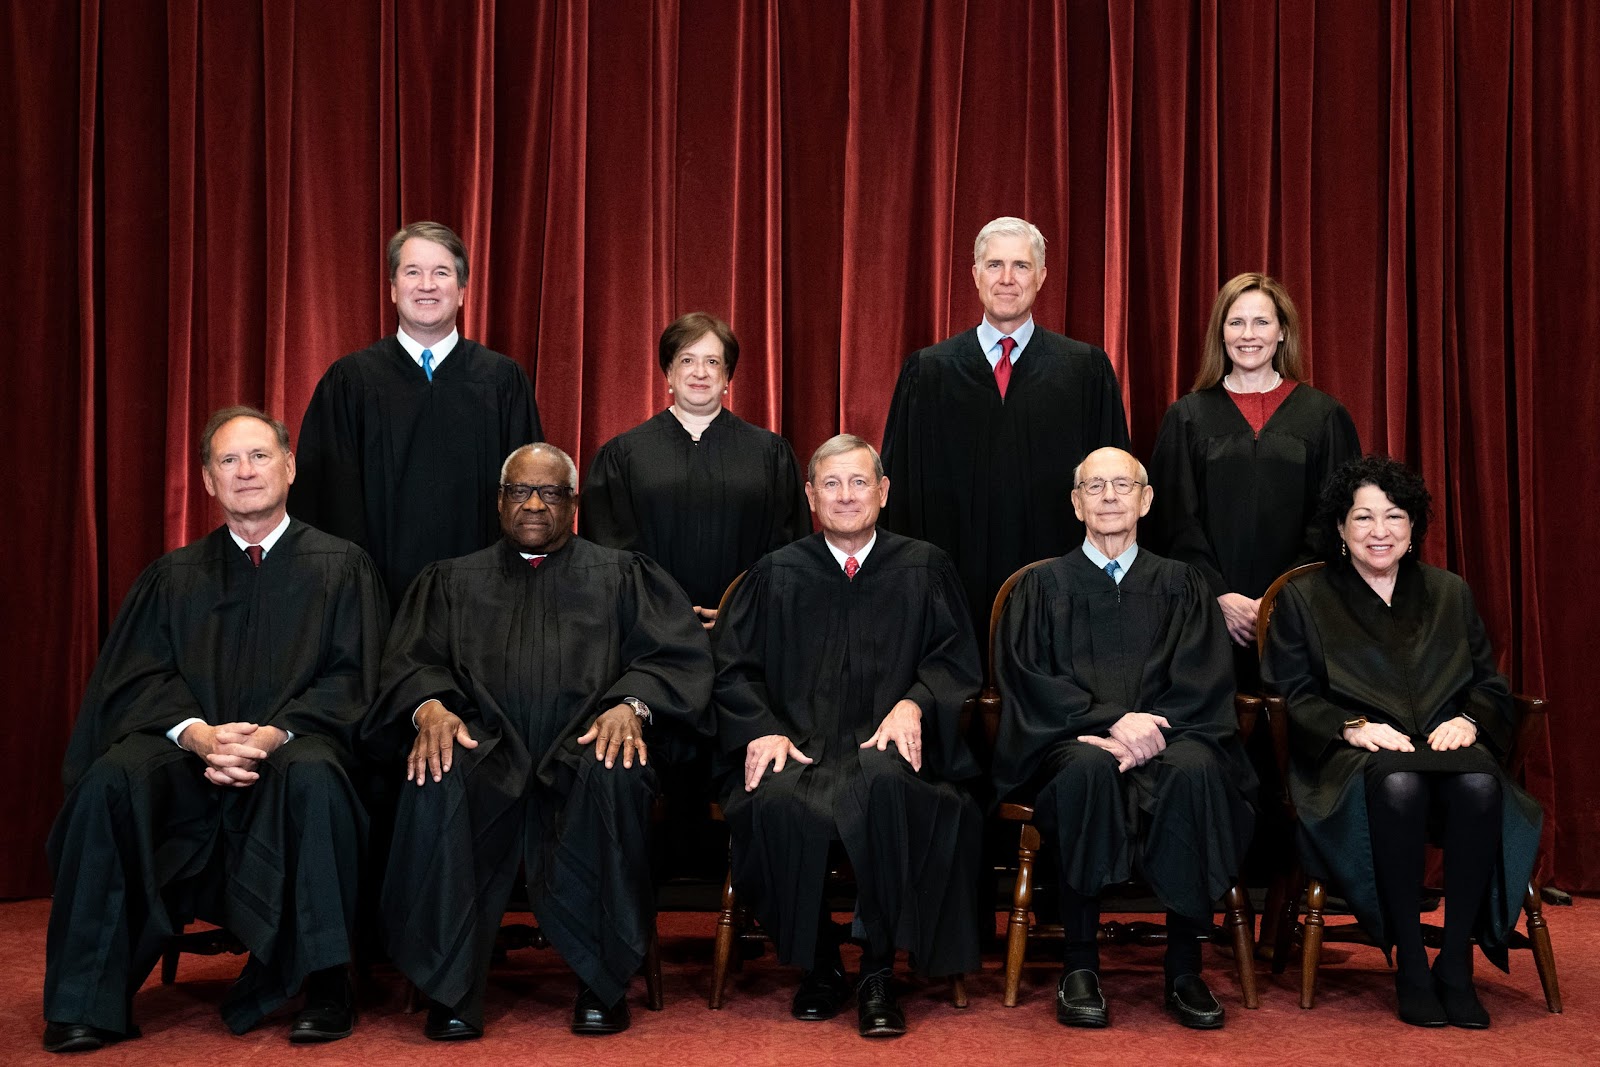 The 2021 United States Supreme Court justices